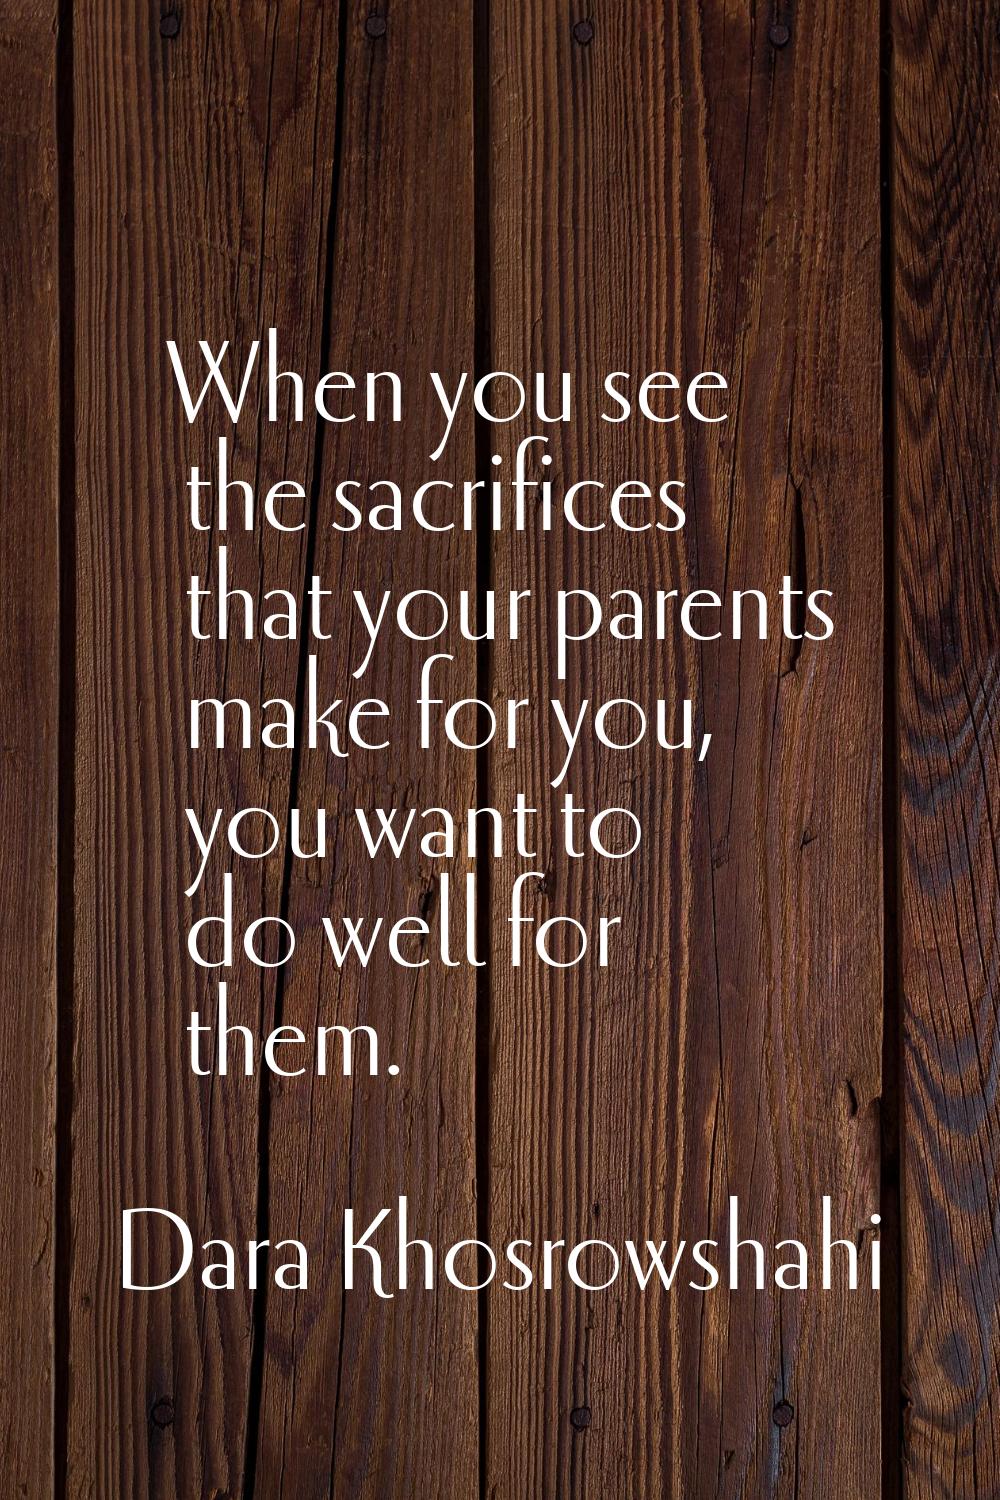 When you see the sacrifices that your parents make for you, you want to do well for them.